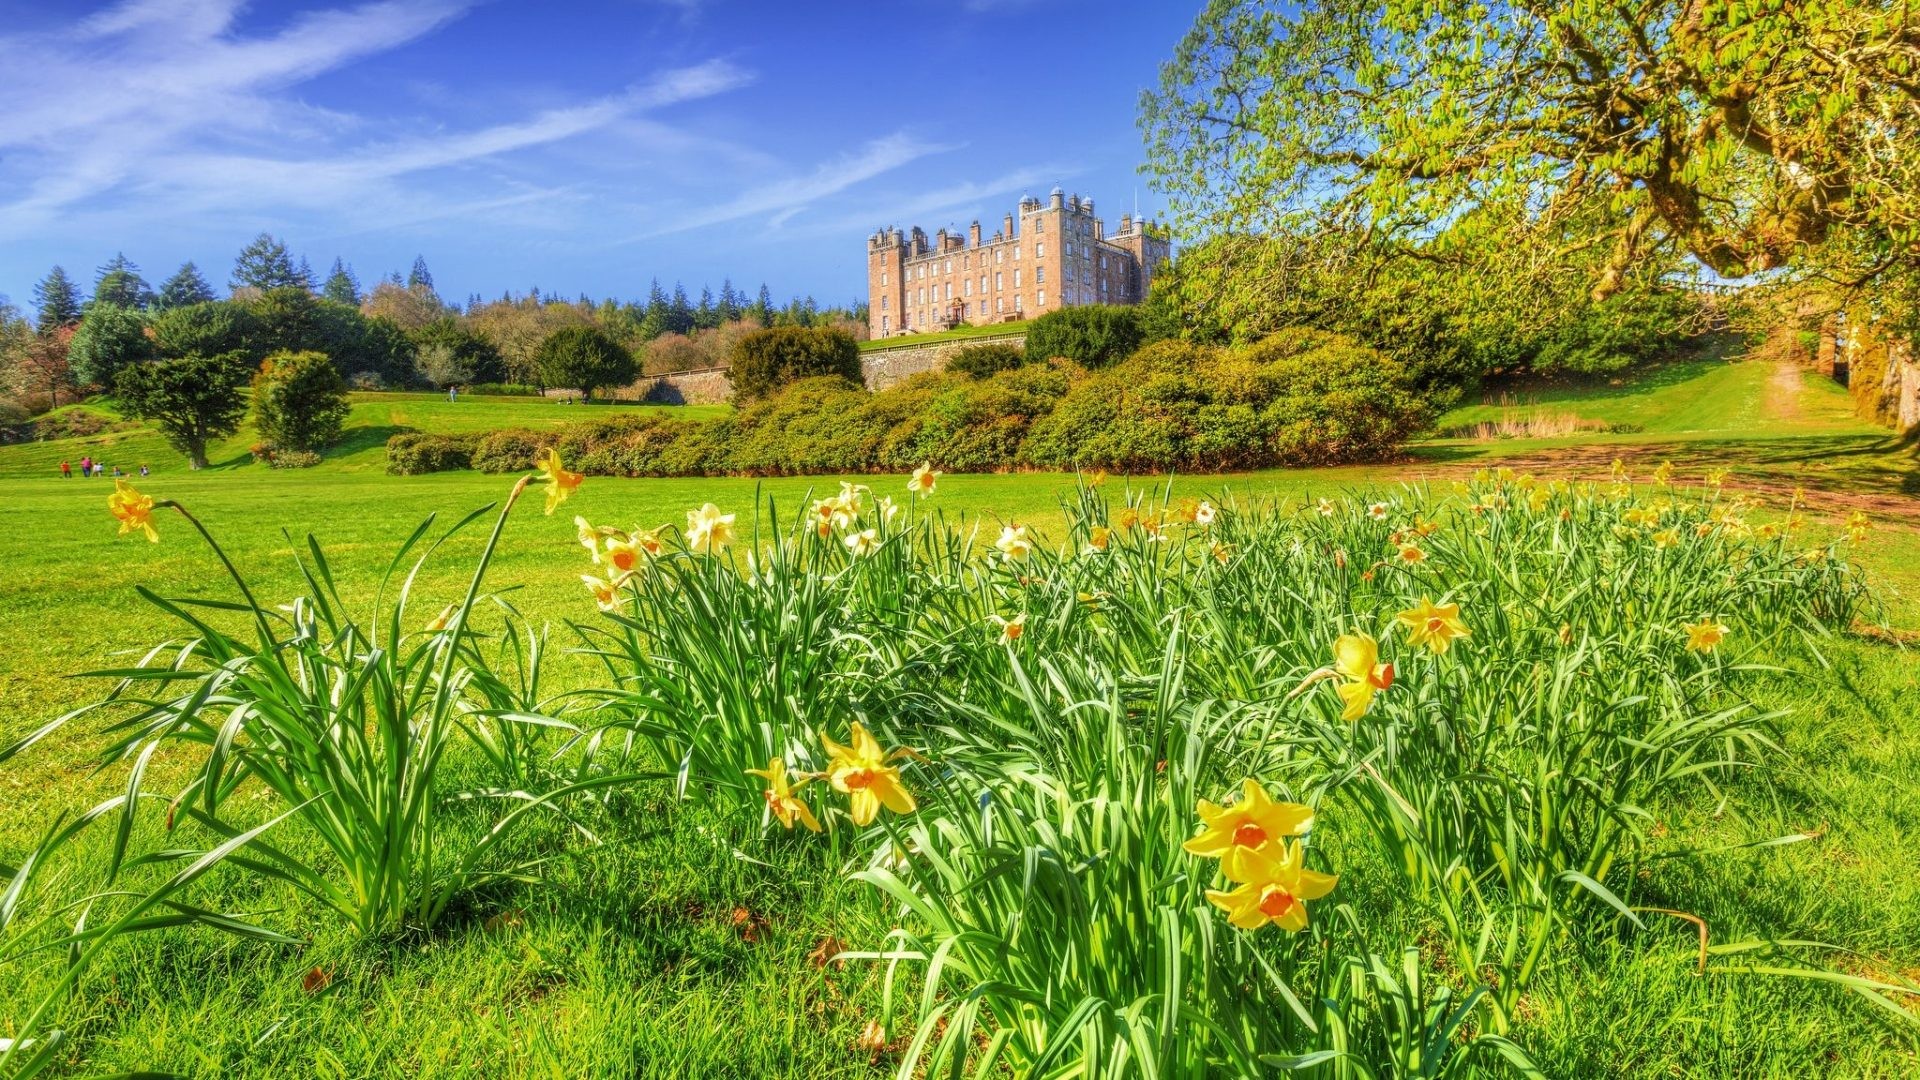 1920x1080 Spring Tag - Nature Spring Kingdom Grass Shrubs Castles Drumlanrig Castle  United Daffodils Cities Wallpapers For